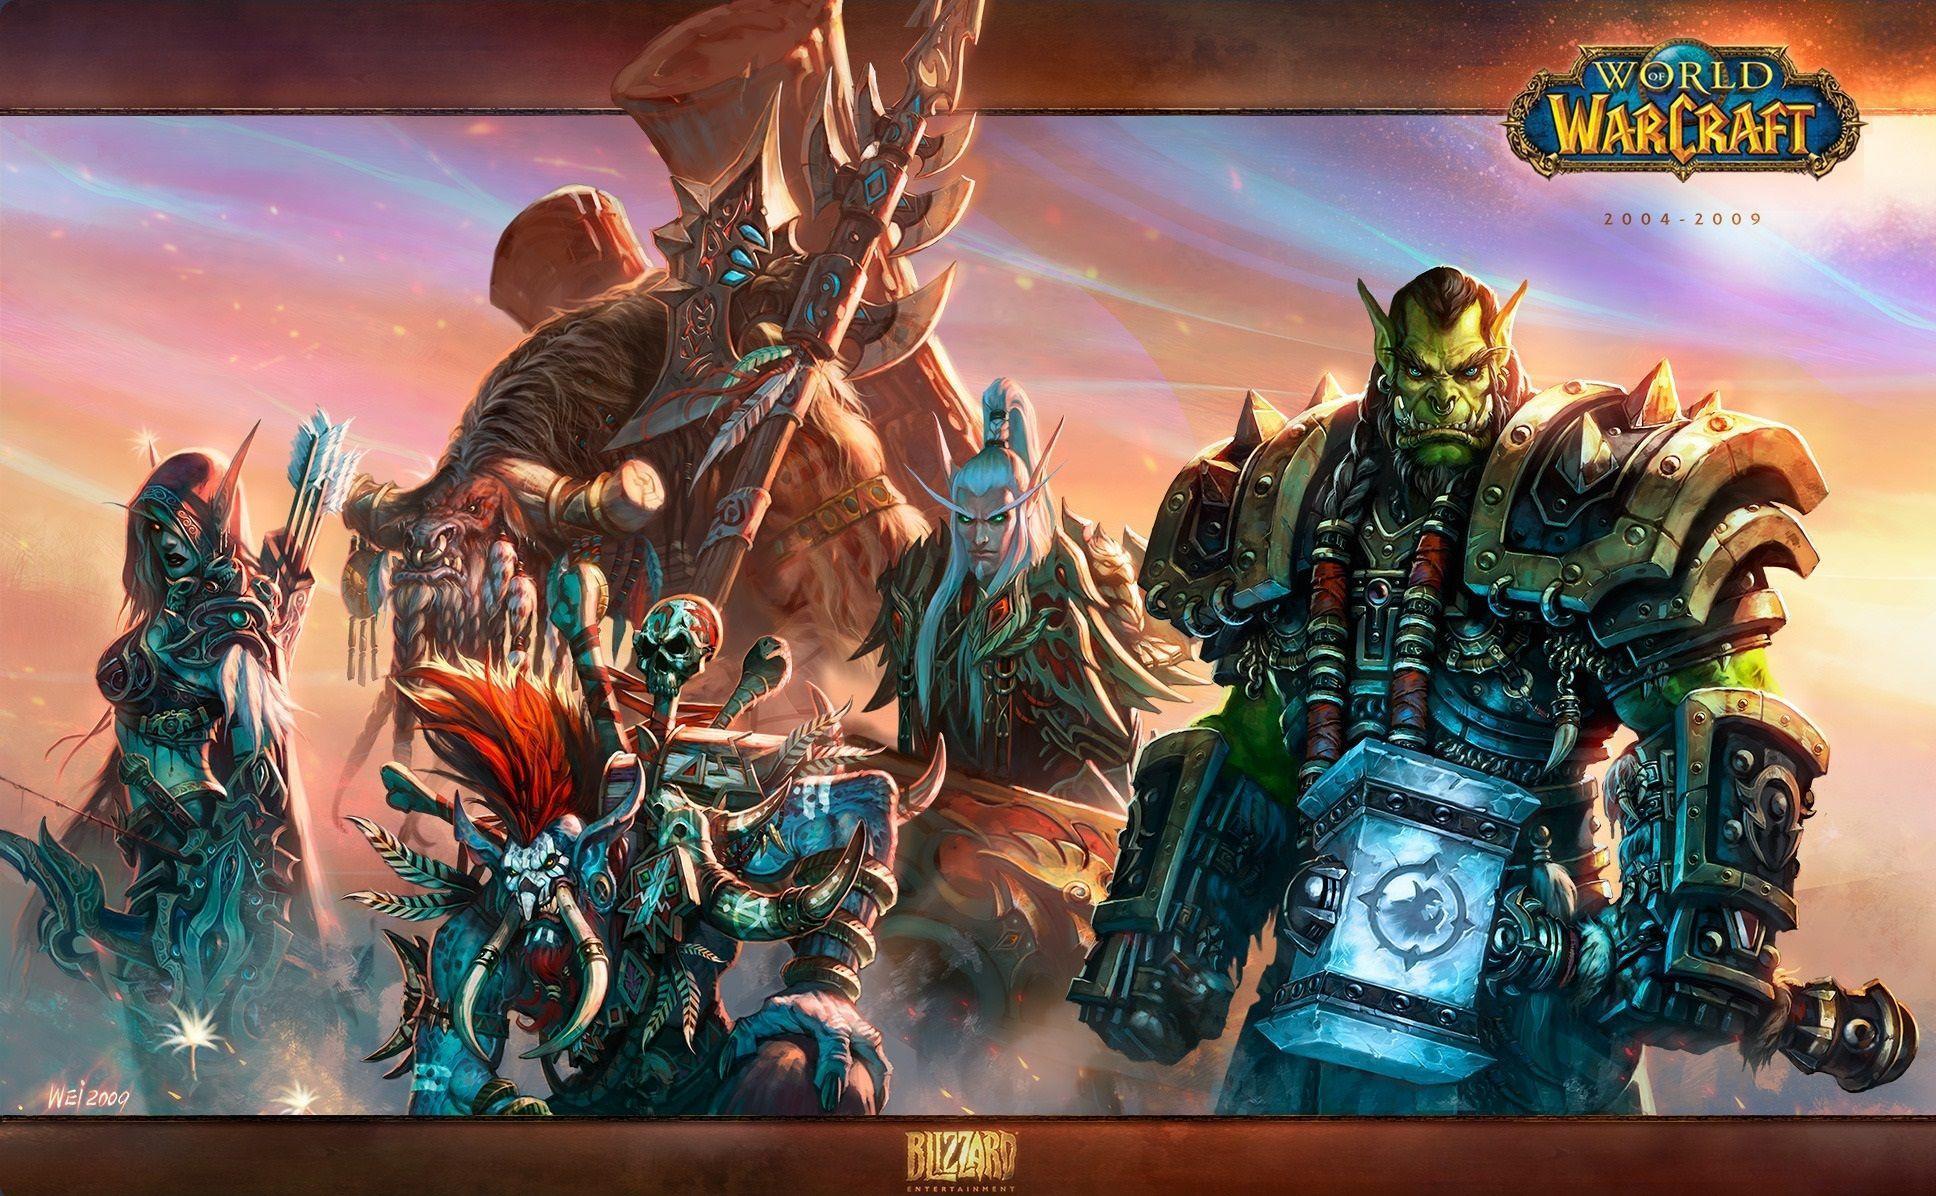 Download Wallpaper weapons, Blizzard, wow, world of warcraft